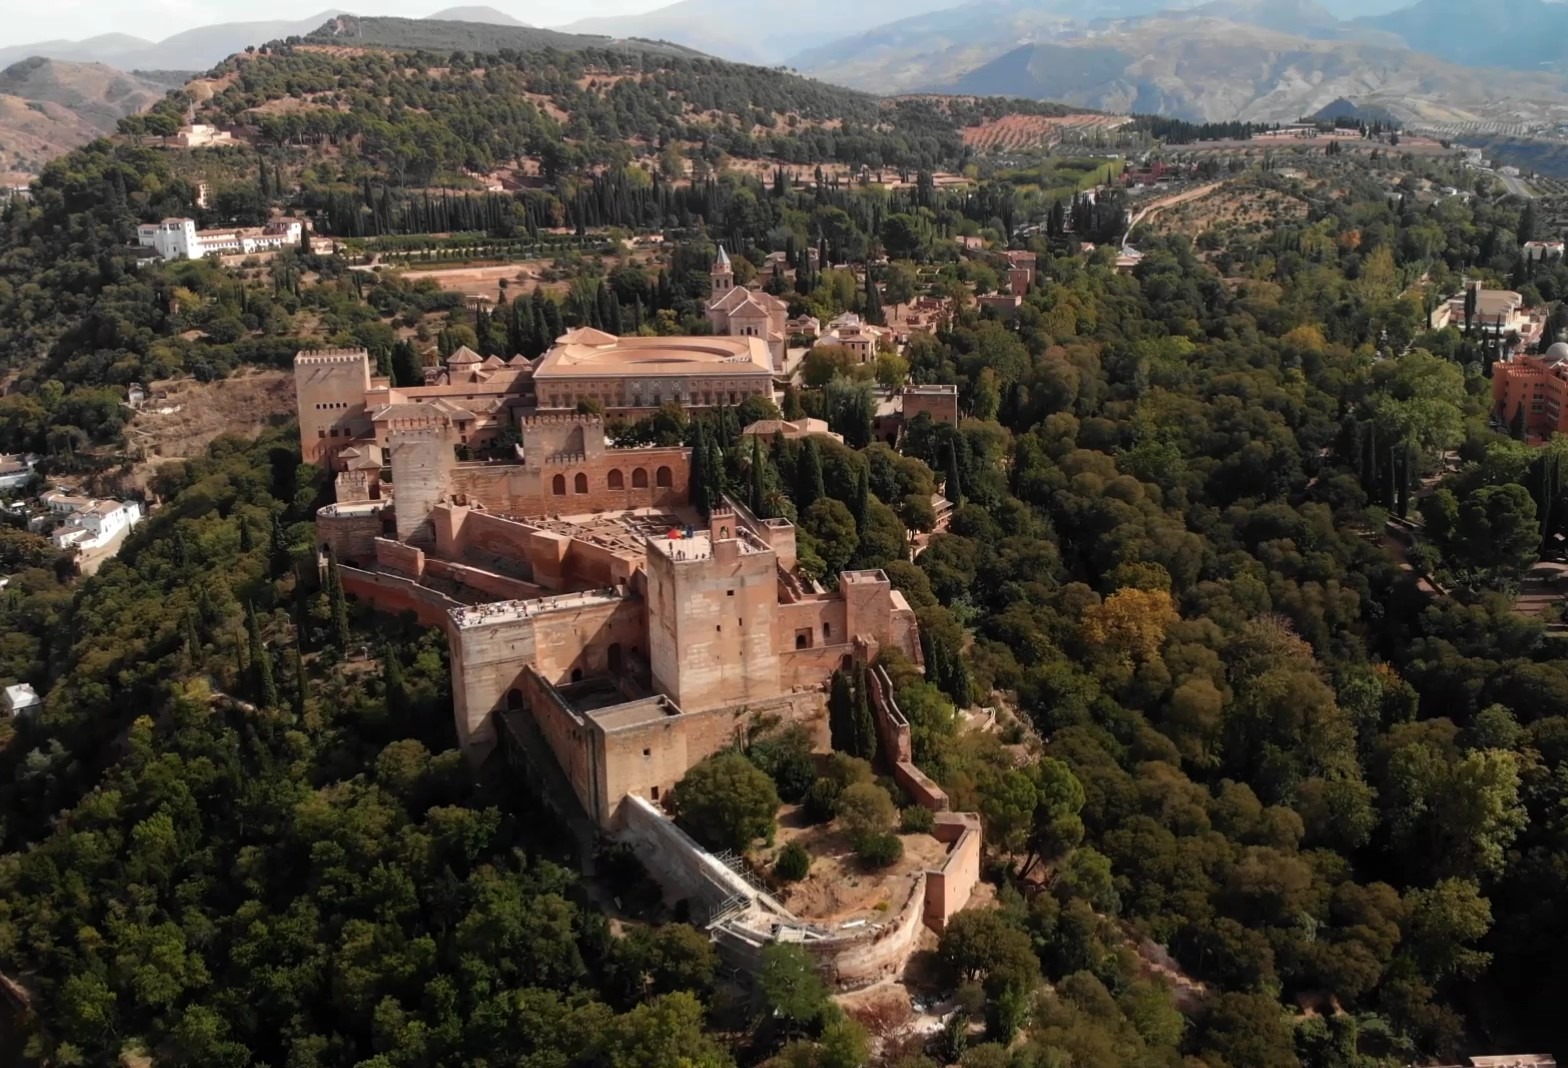 How To Visit The Alhambra